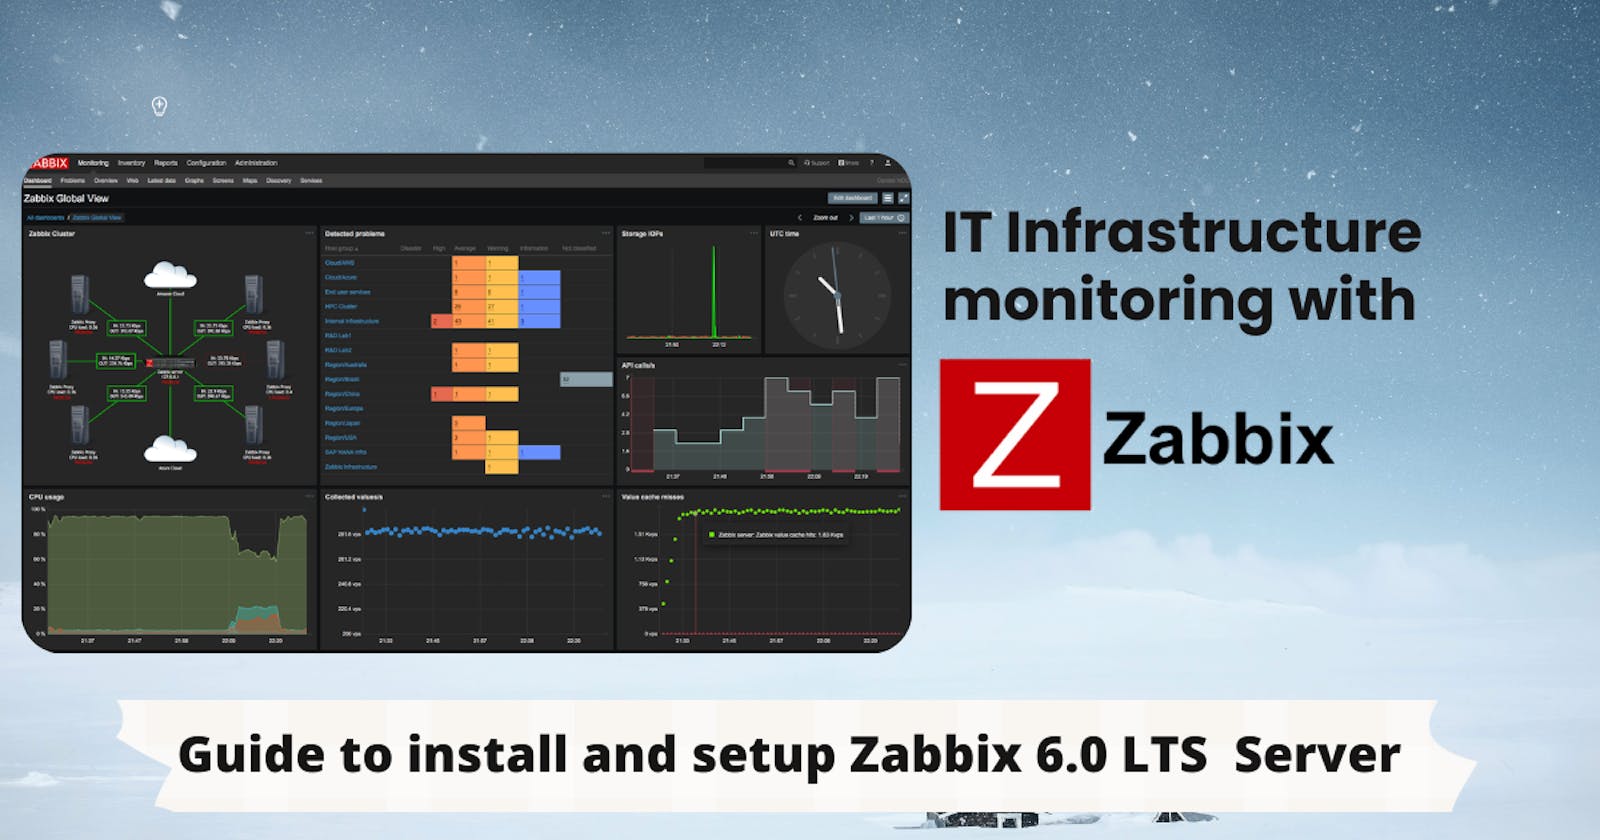 Installation and Setup of the "Zabbix" for monitoring your IT infrastructure